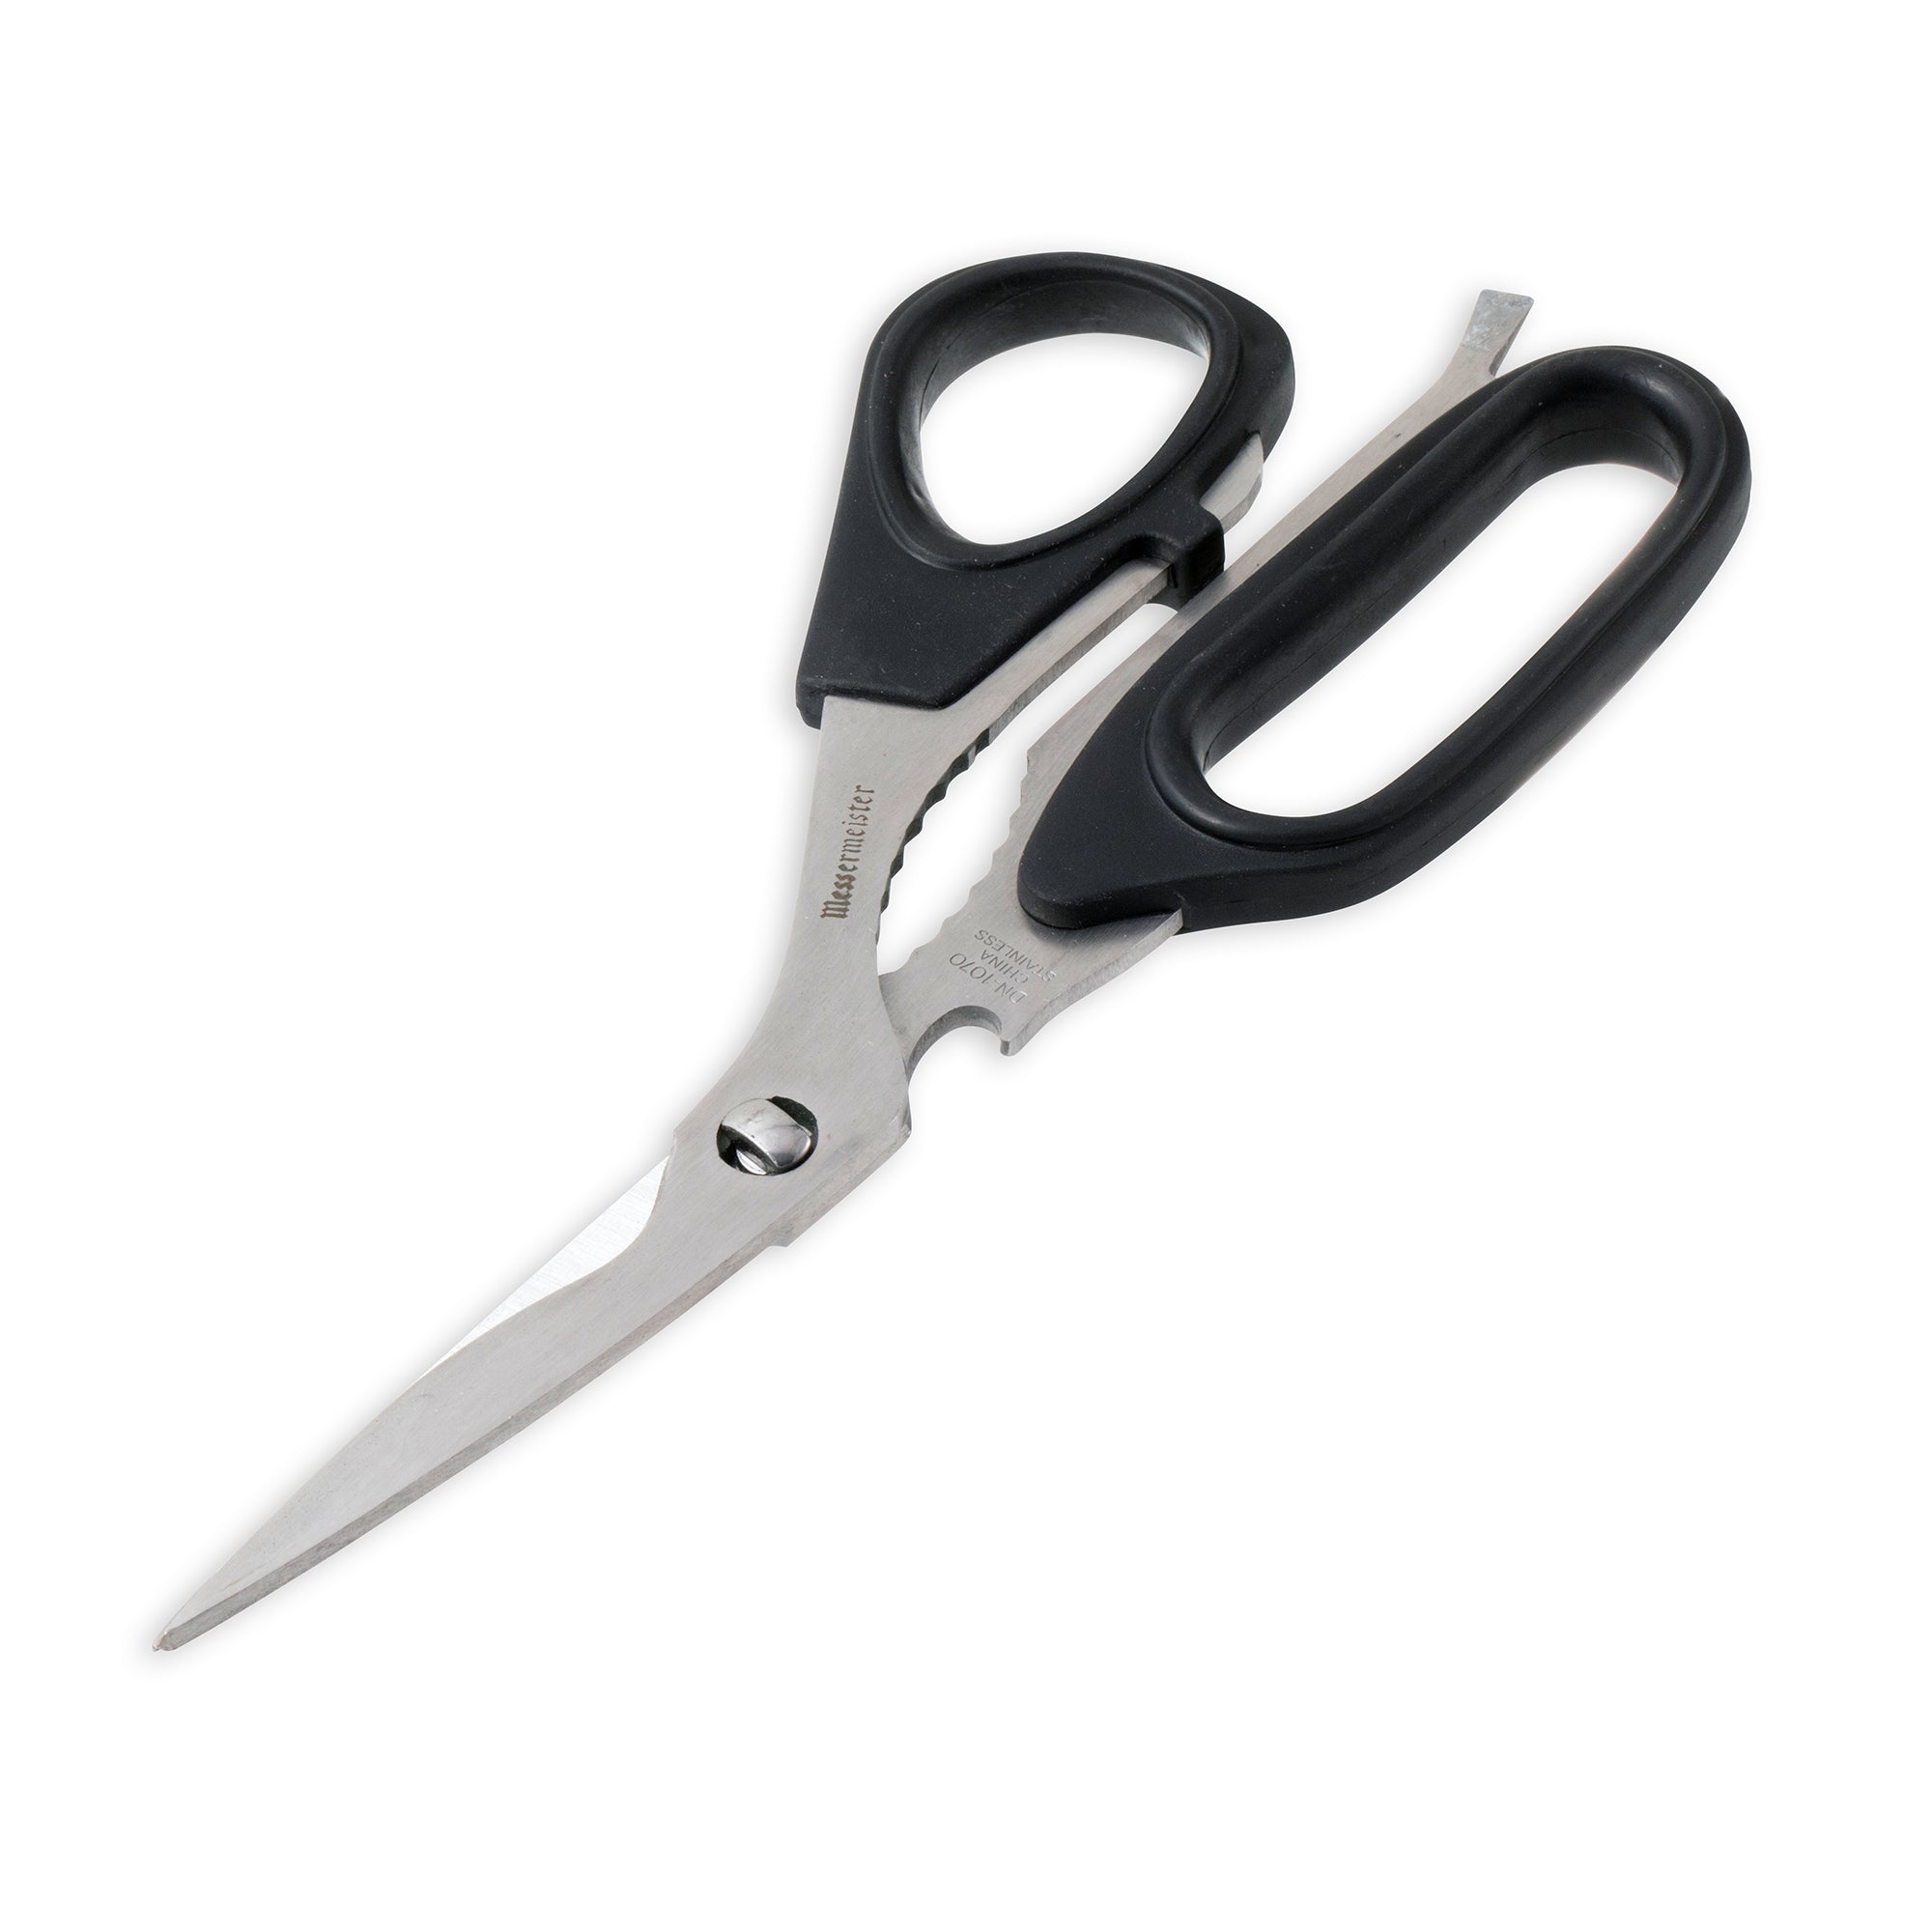 Effortless Kitchen Scissors – Help you cook efficiently and